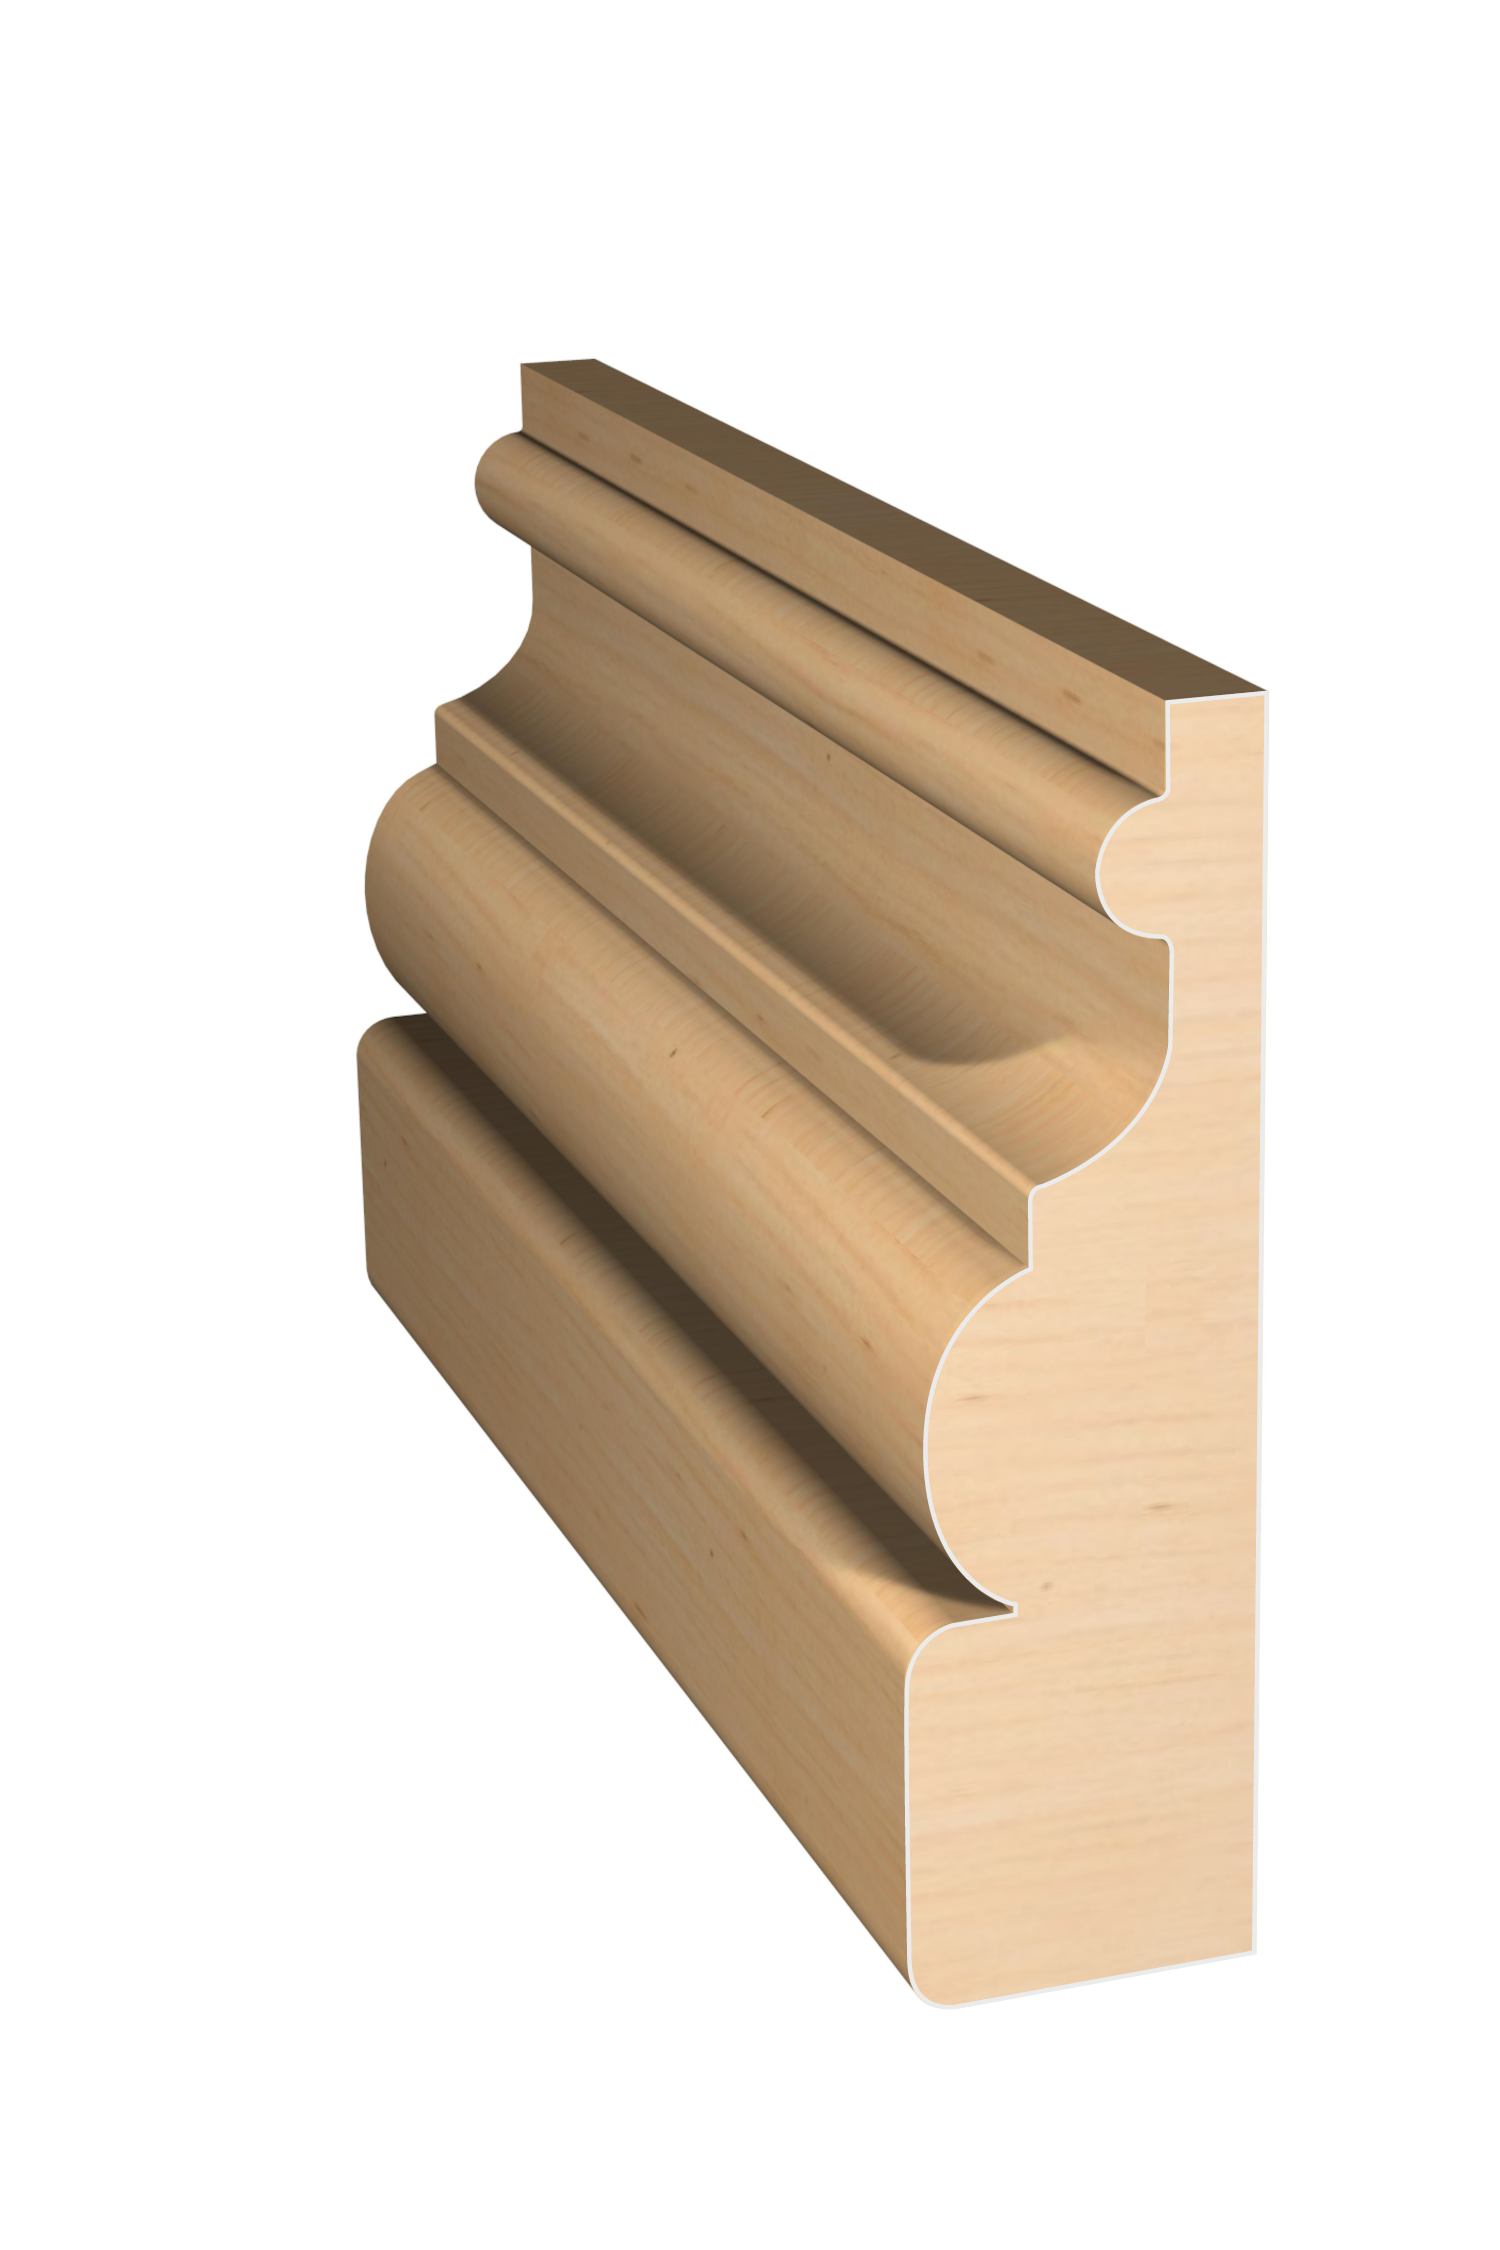 Three dimensional rendering of signature stock casing wood molding CAPL3121 made by Public Lumber Company in Detroit.